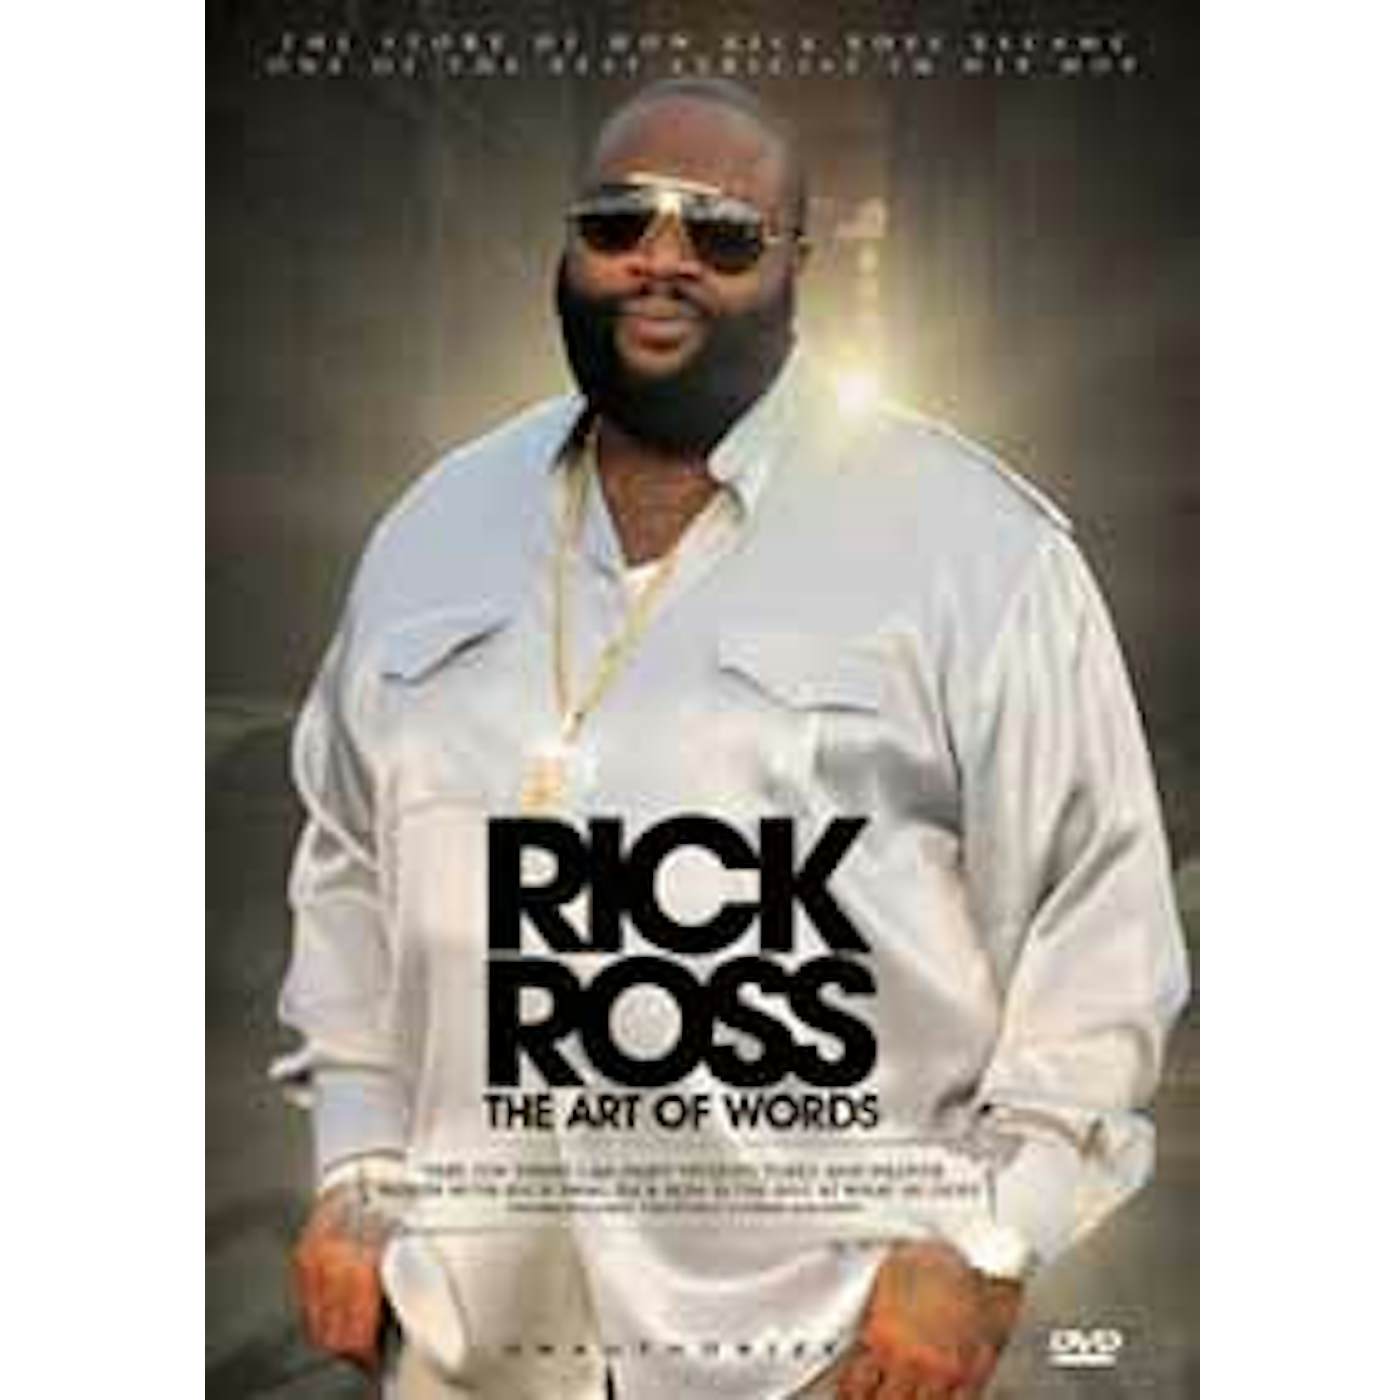 Rick Ross DVD - The Art Of Words: Unauthorized